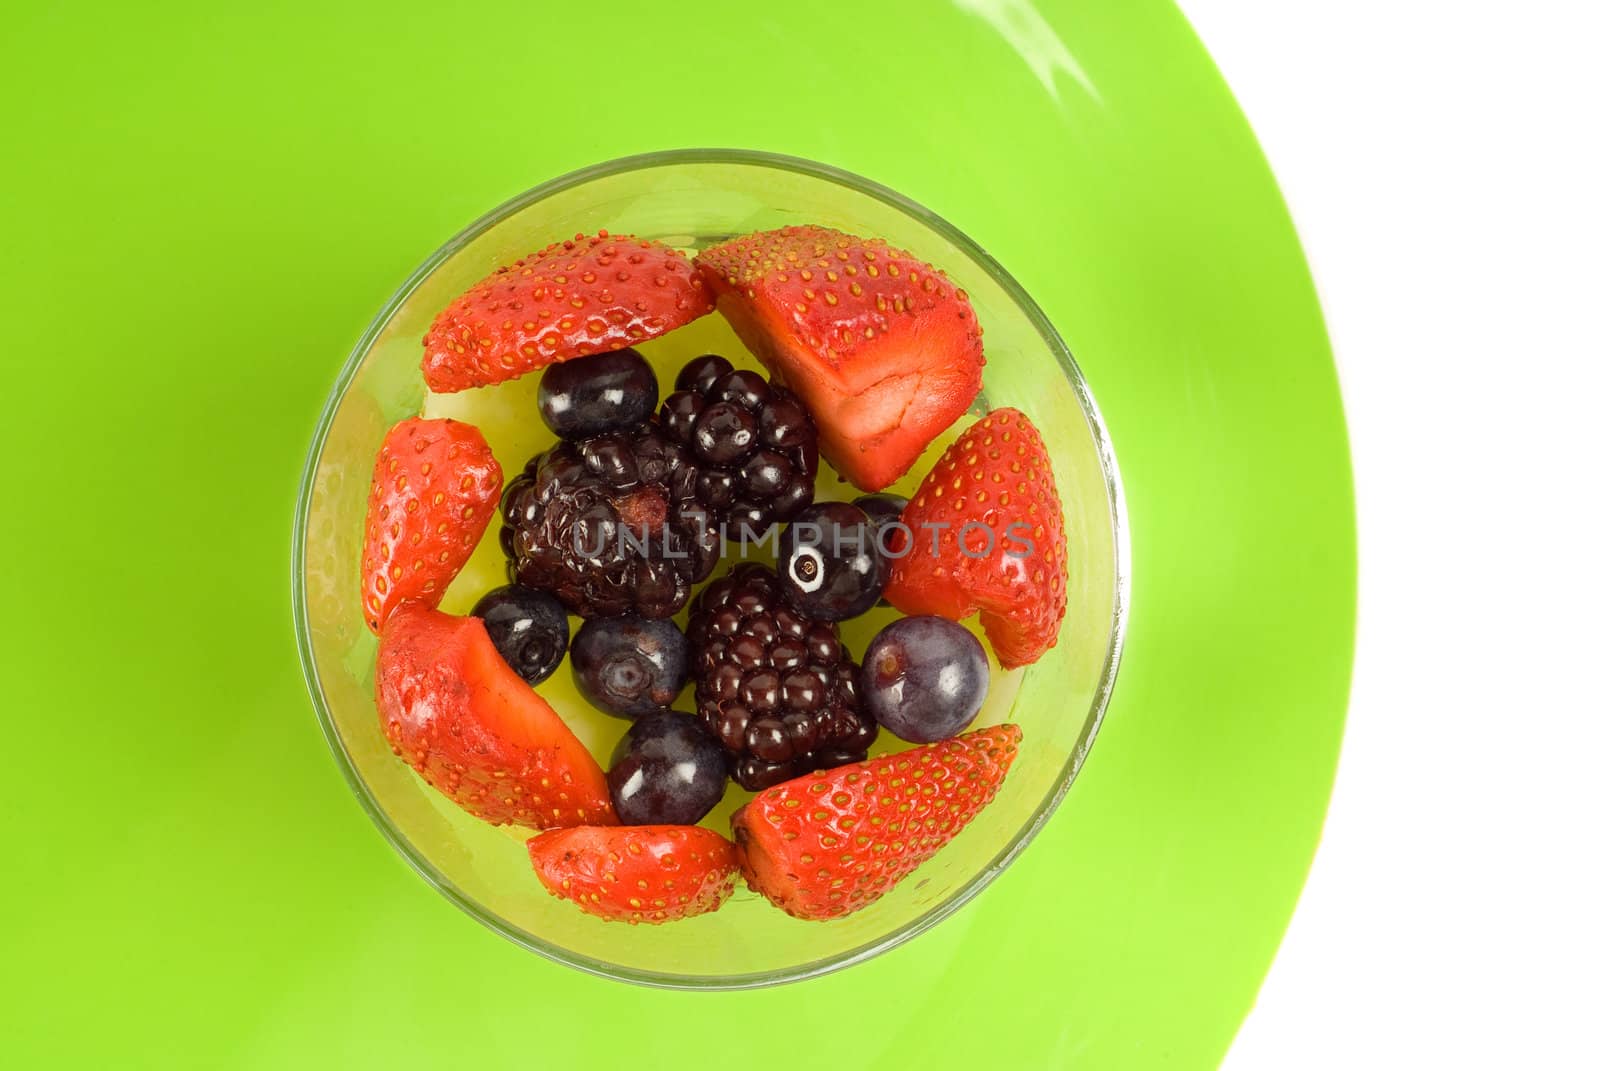 Glass of strawberries and other berries on green plate